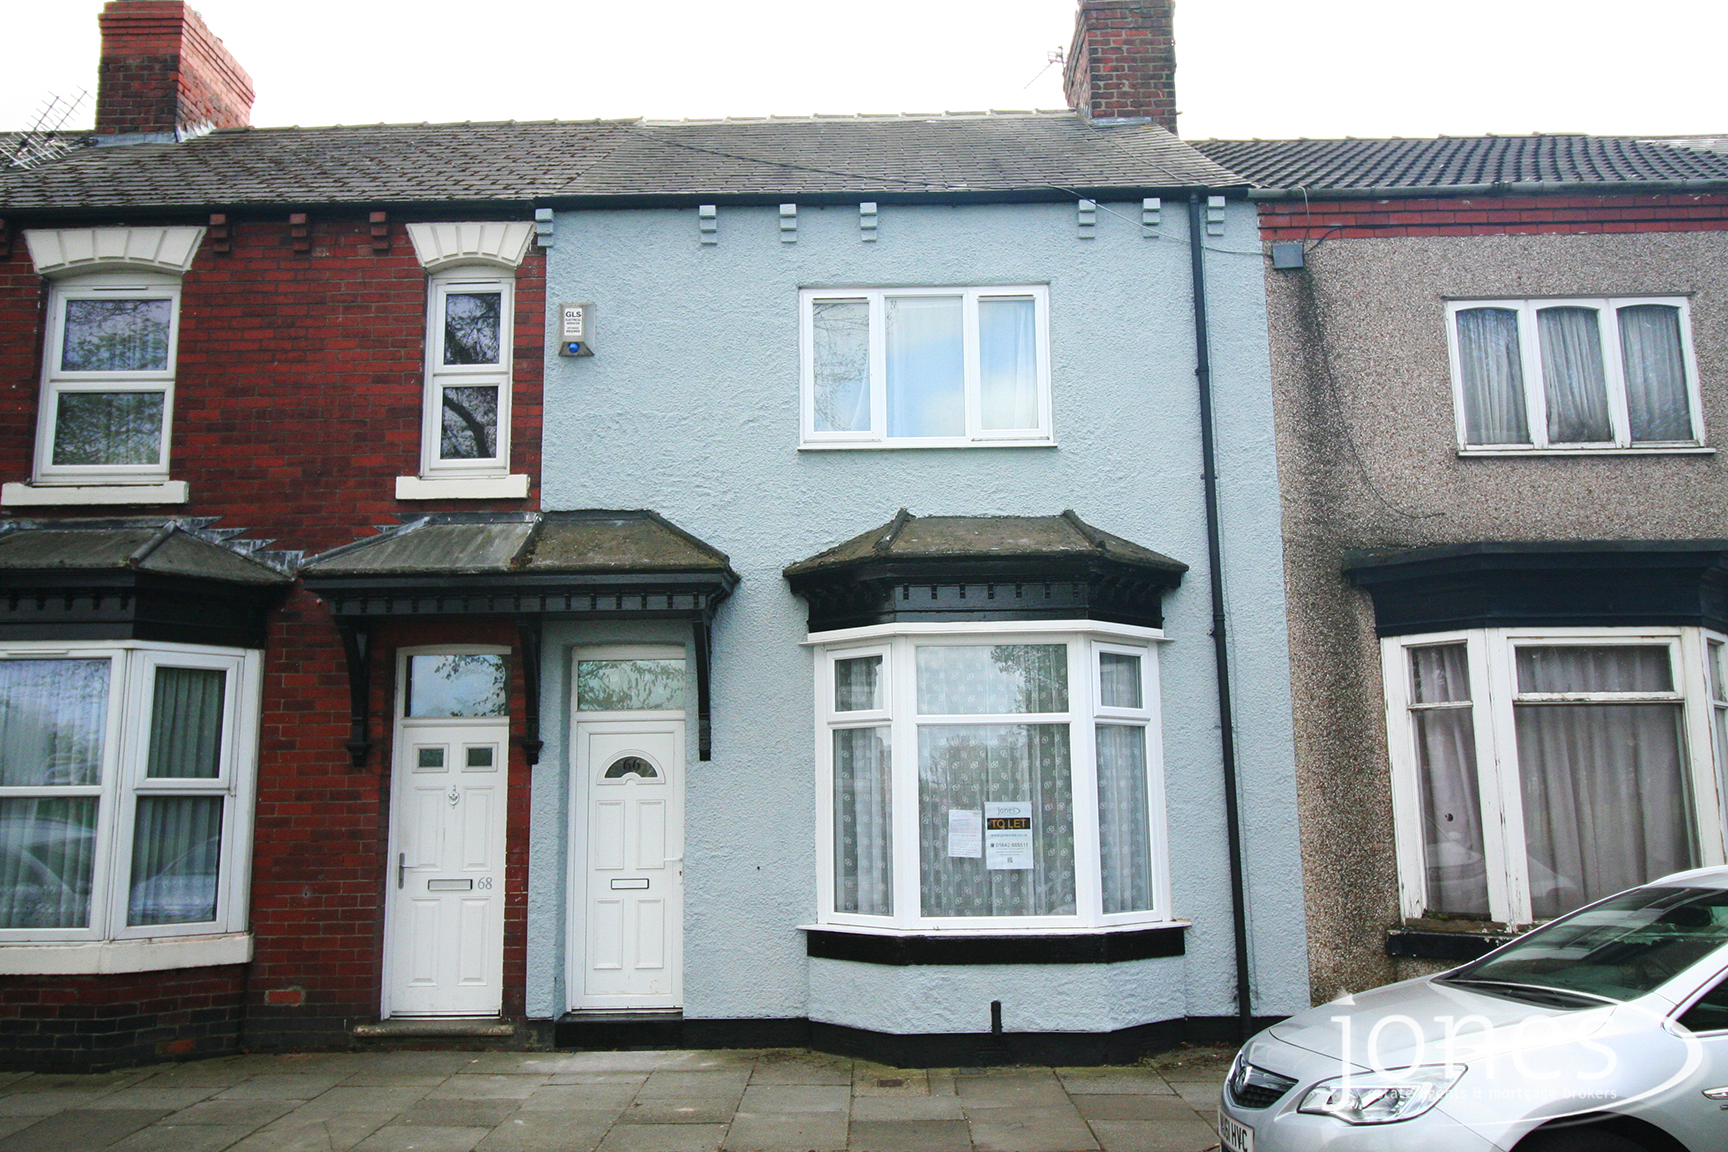 Home for Sale Let - Photo 01 Victoria Road,  Thornaby, Stockton on Tees TS17 6HH